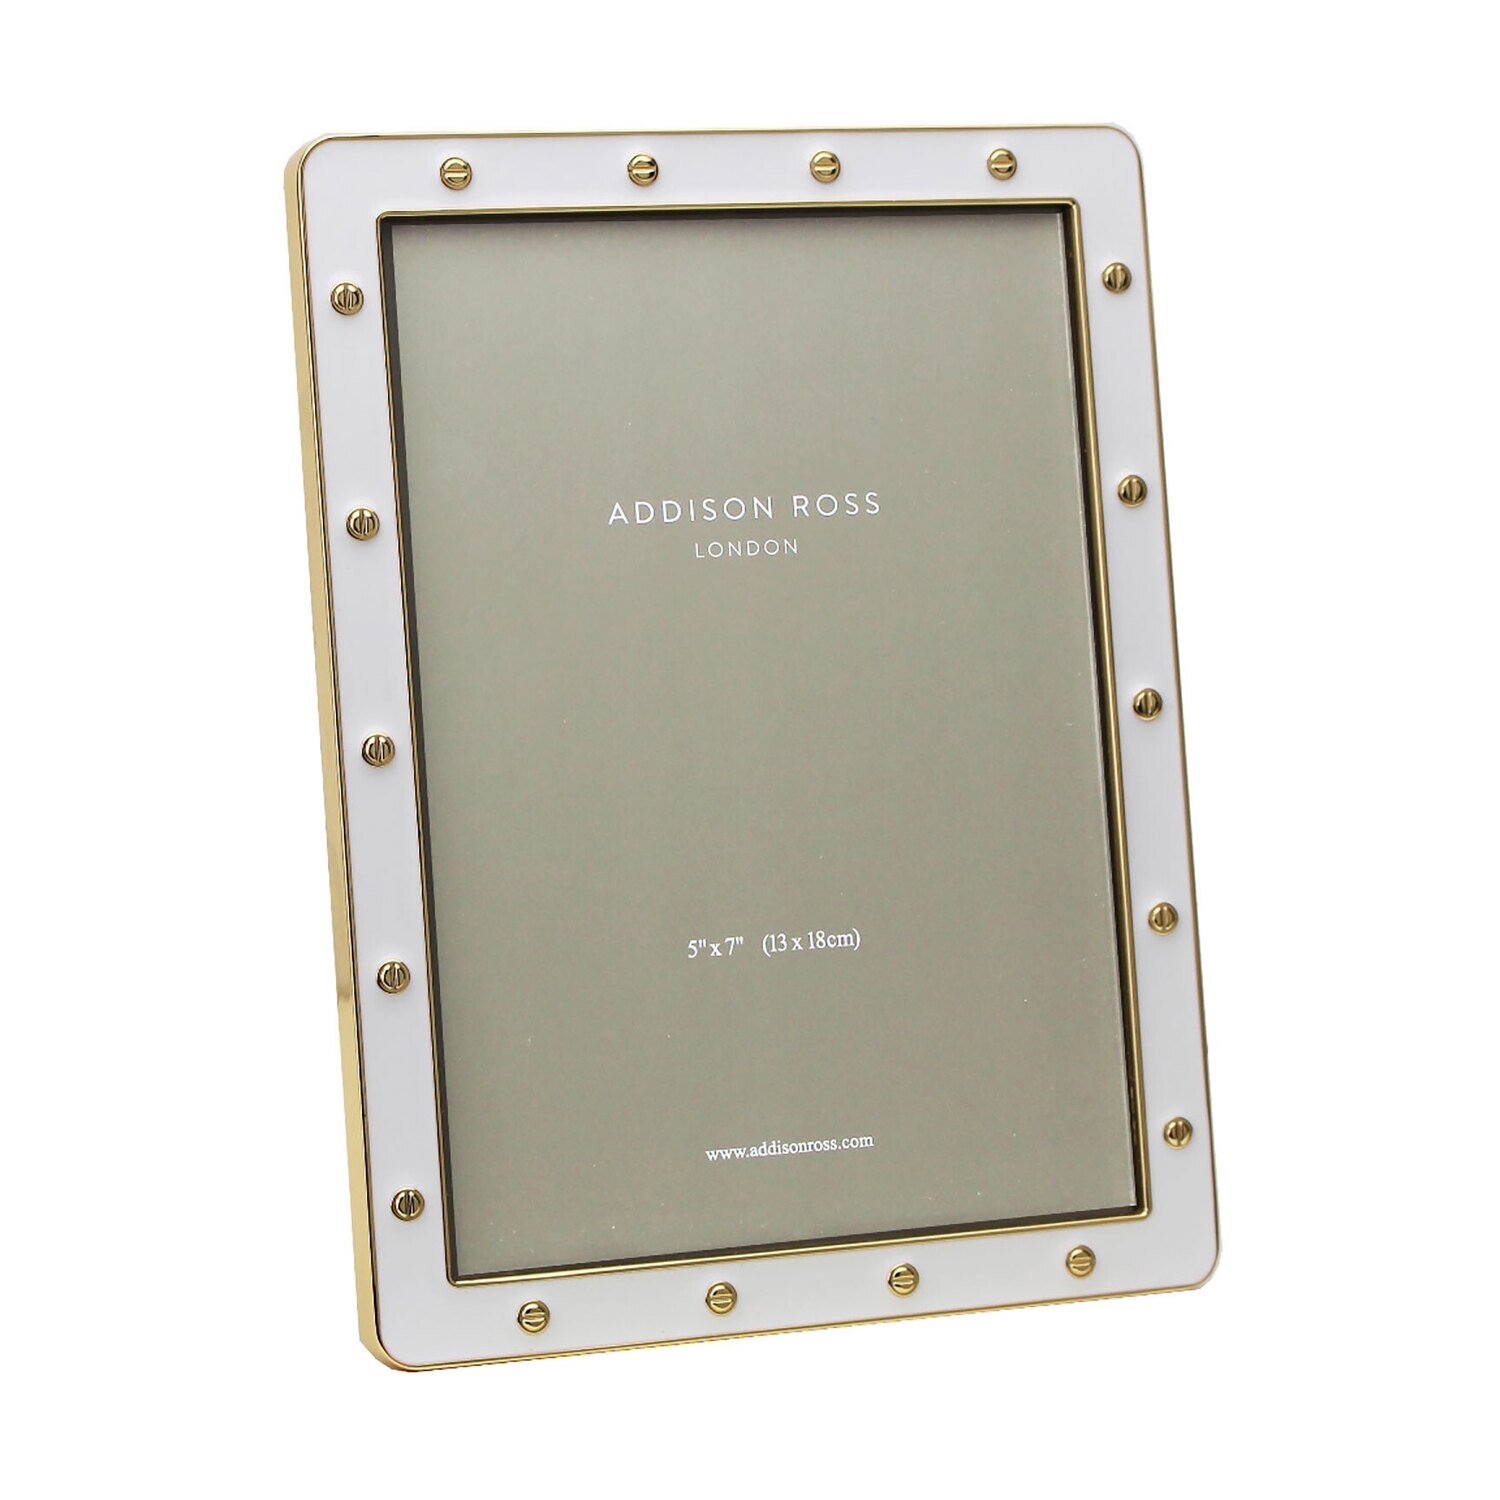 Addison Ross 5 x 7 Inch Locket in Gold White Picture Frame Gold FR6271